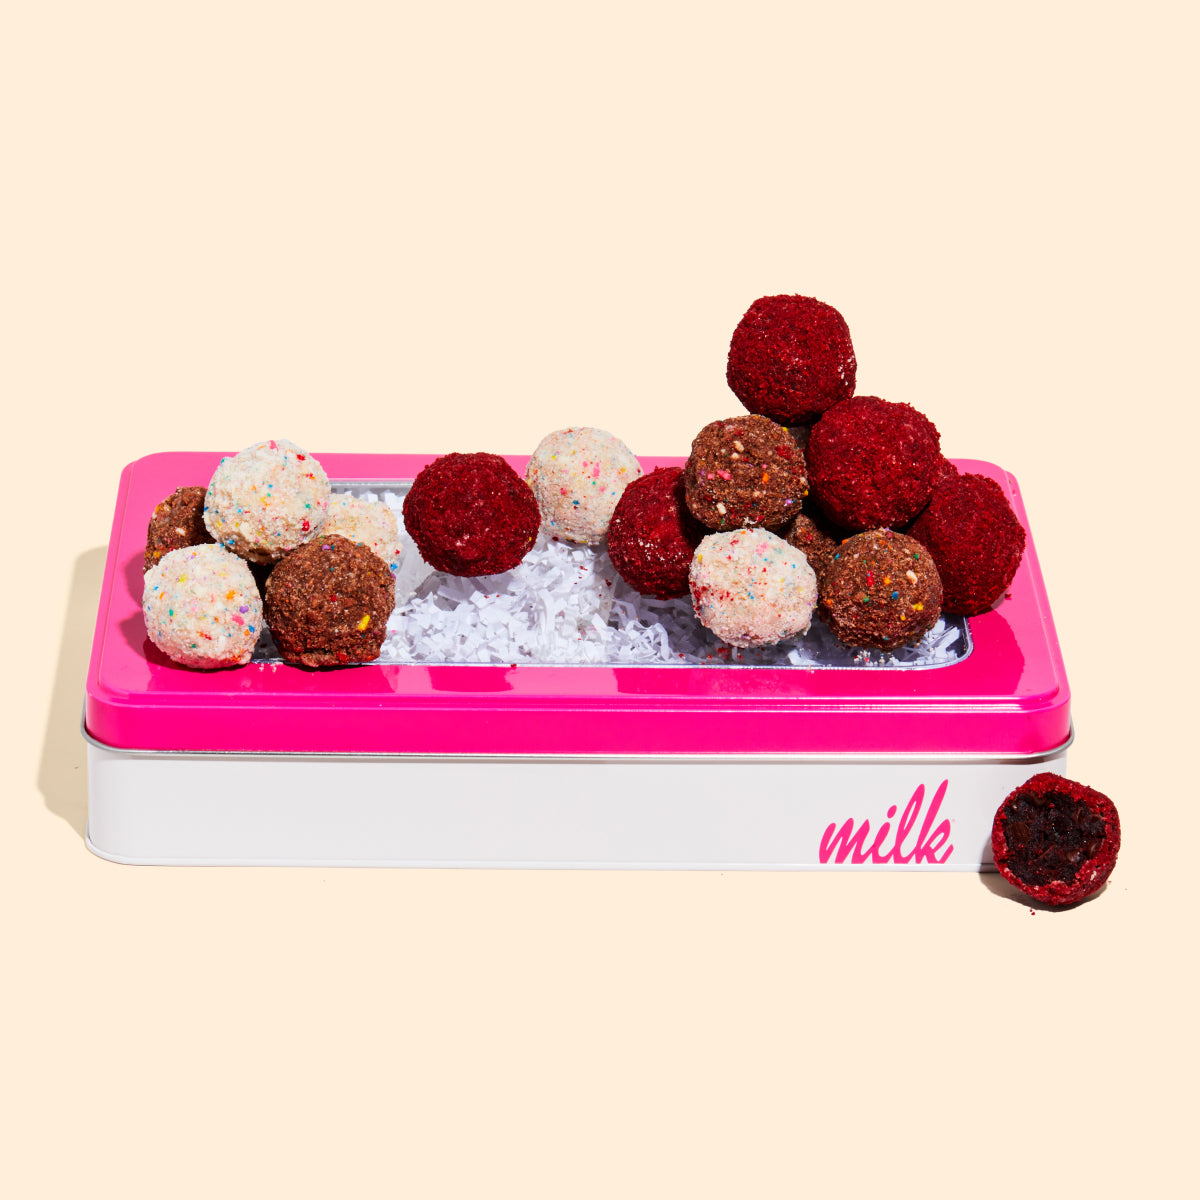 Assorted Truffle Box with a truffle pile on top.